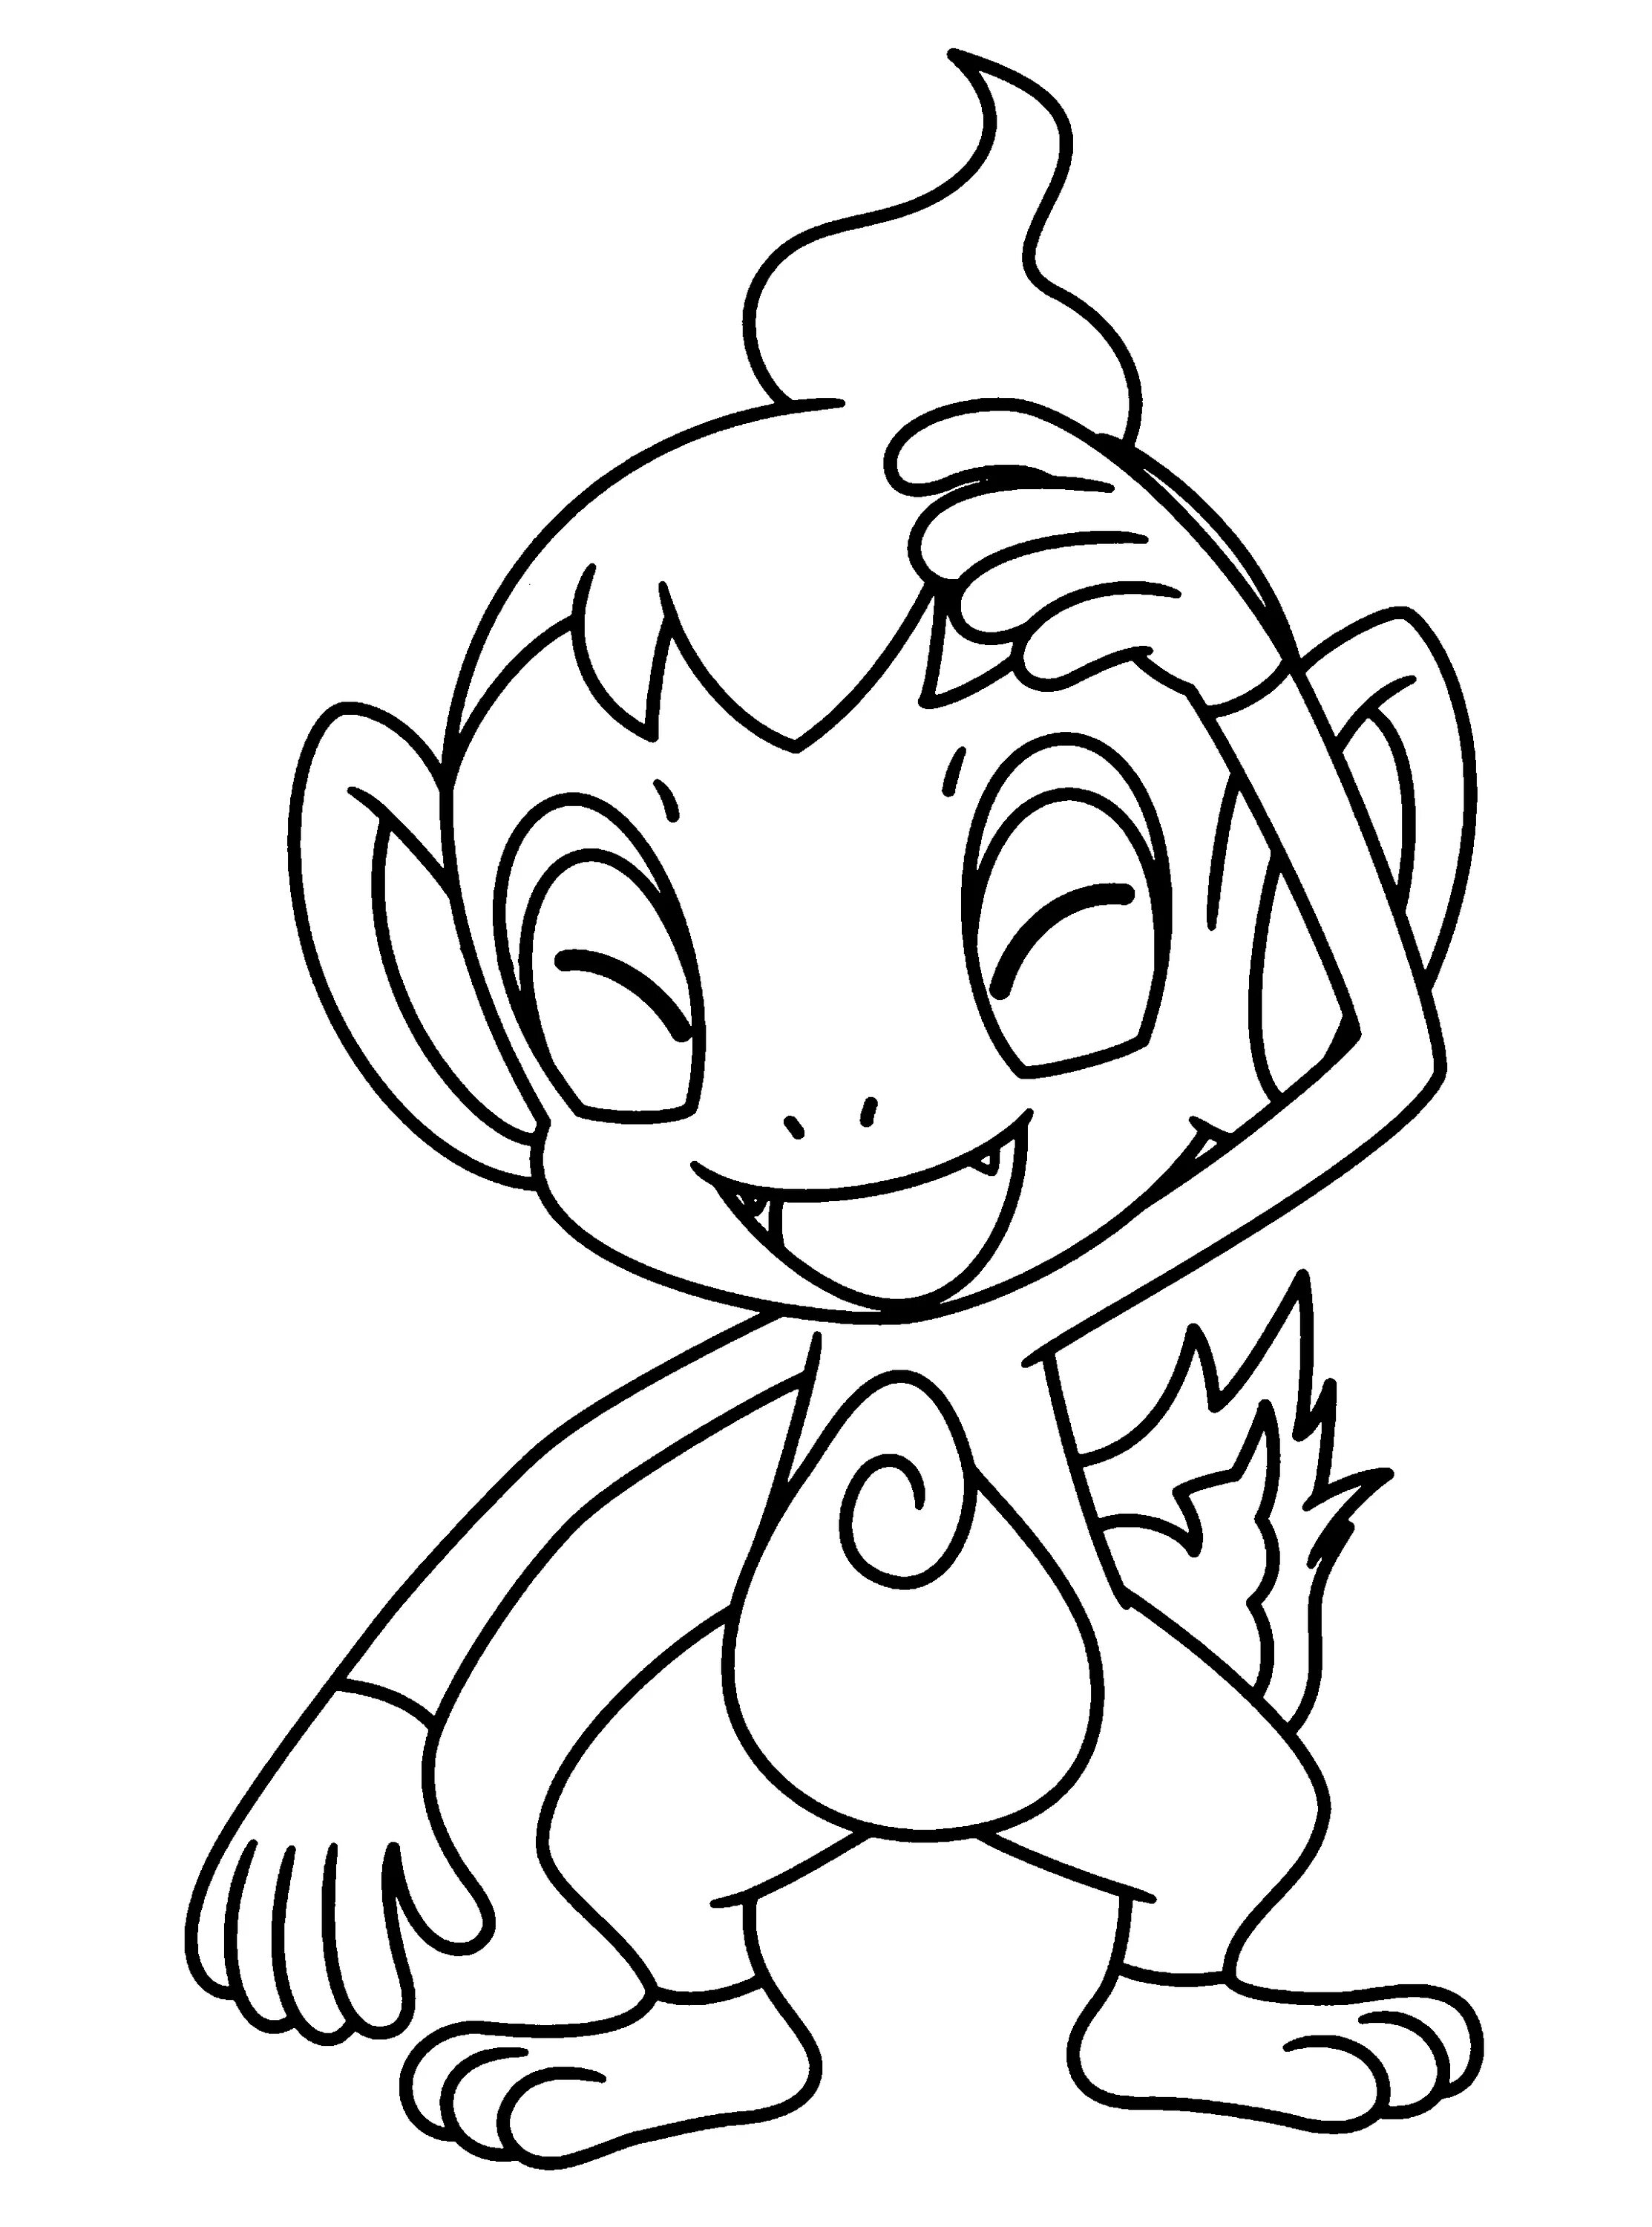 Exquisite chimchar coloring